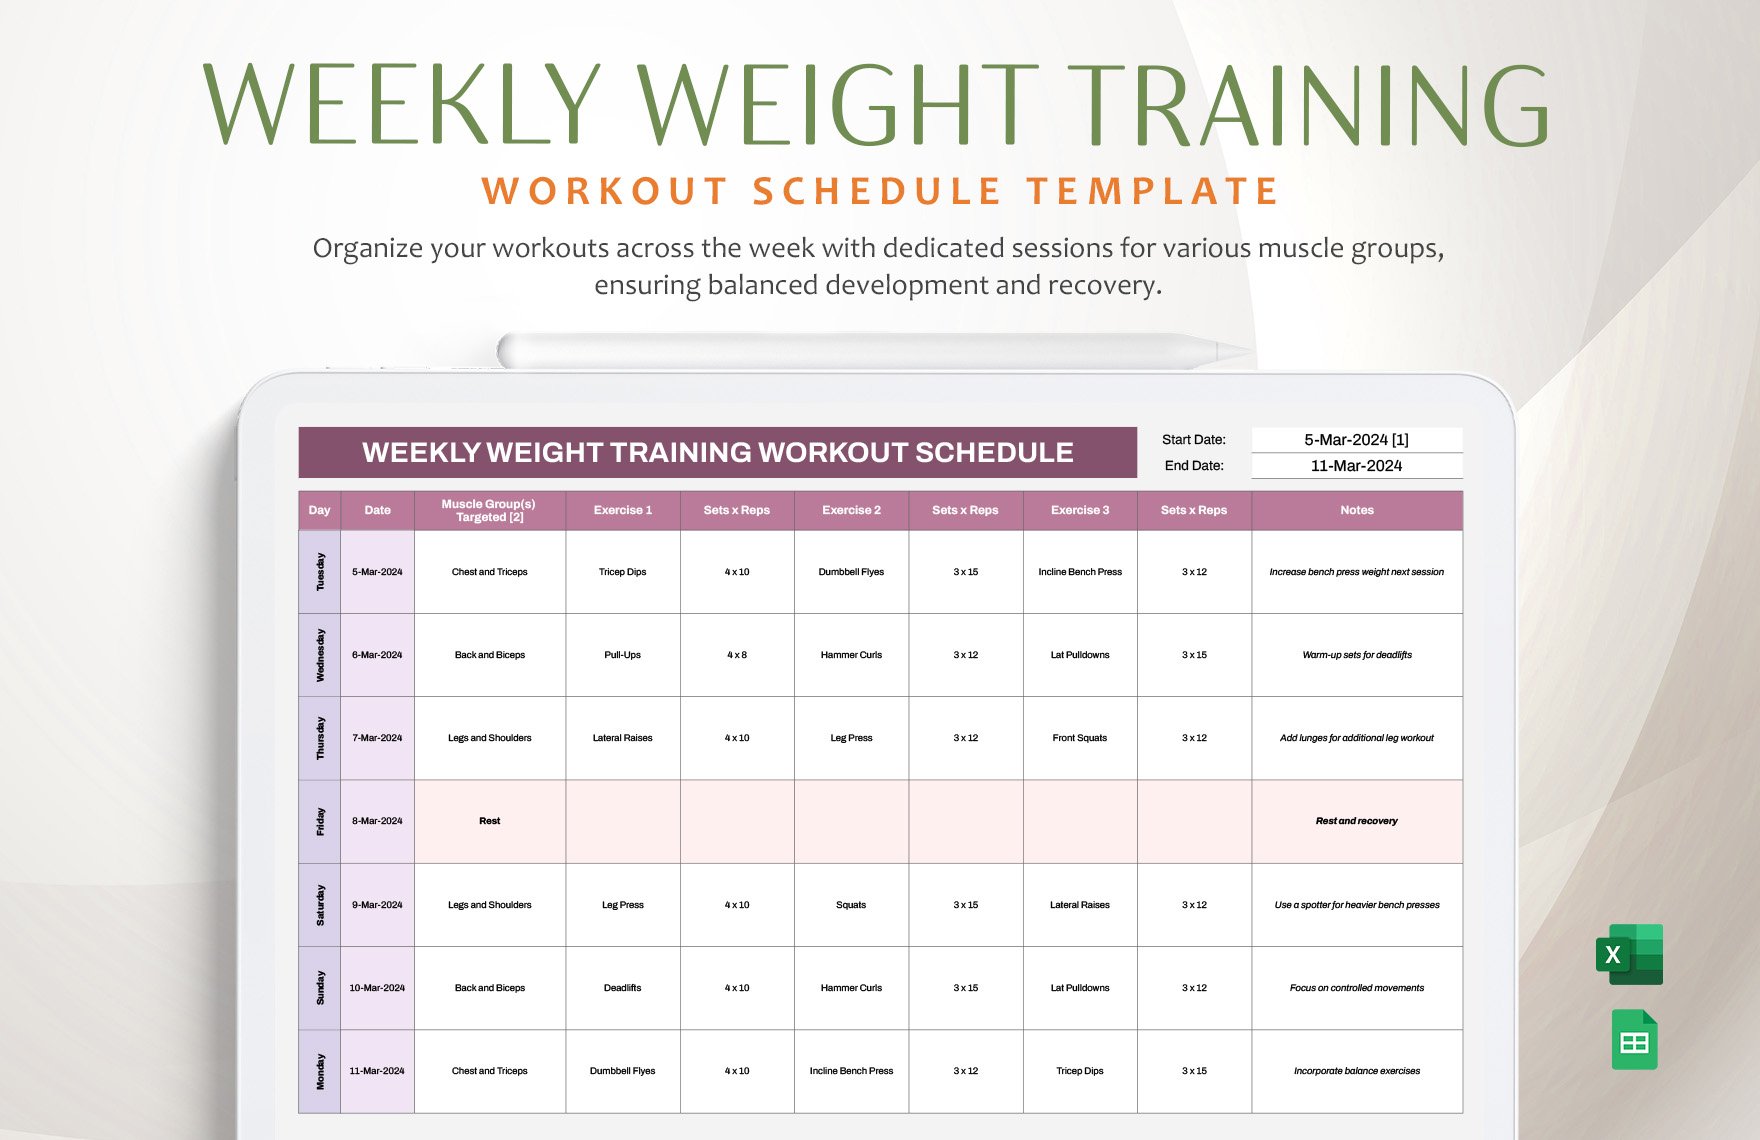 Weekly Weight Training Workout Schedule Template in Excel, Google Sheets